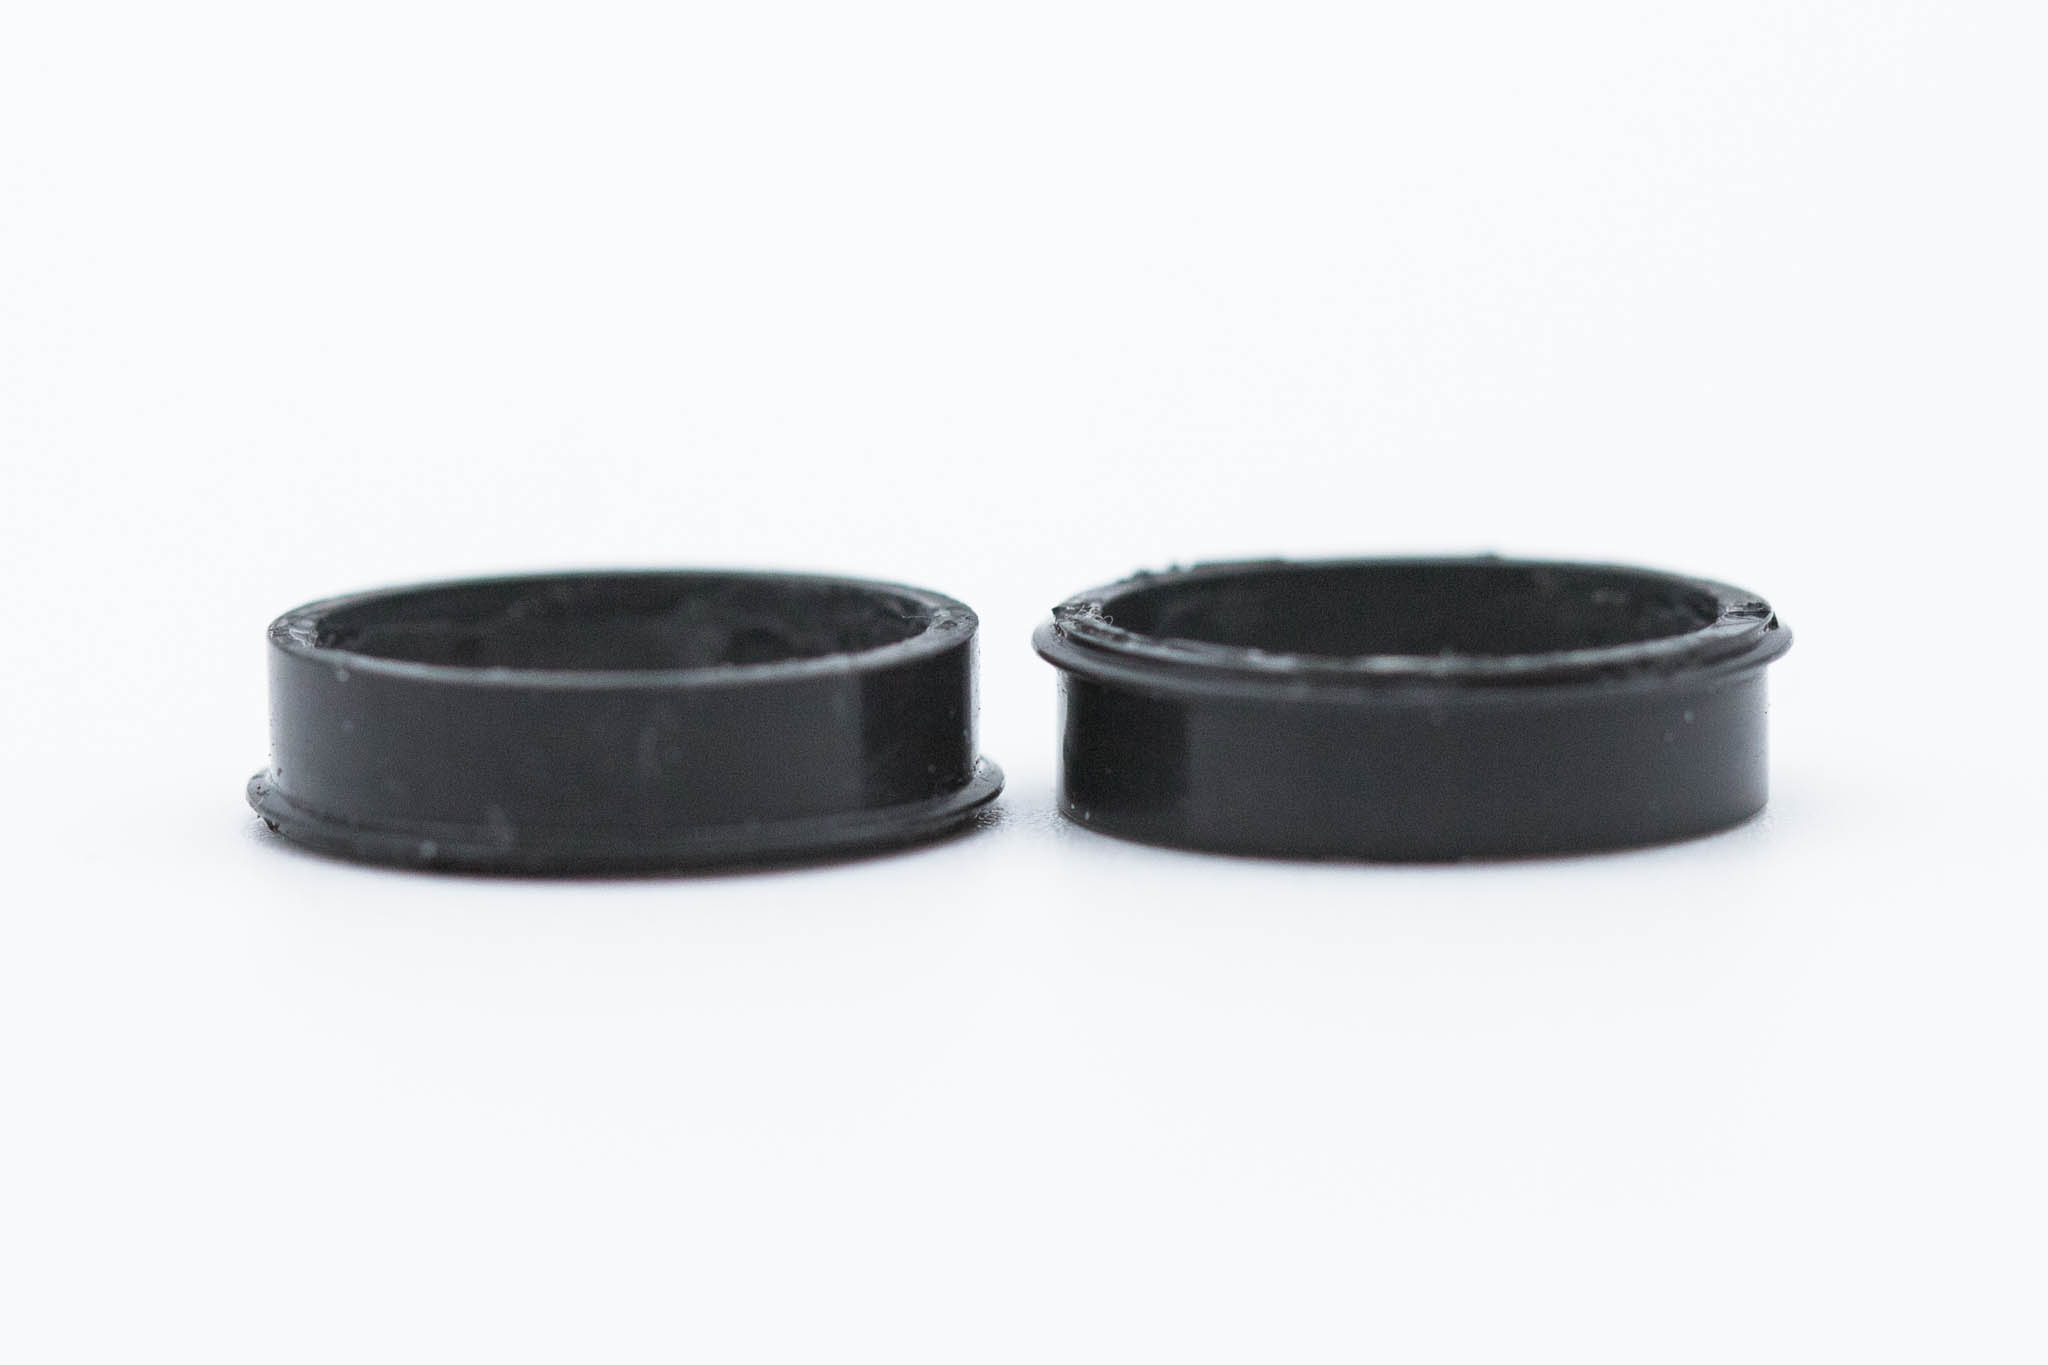 OEM Rubber Cover: Insertion Tube Boot - BF-Q190, BF-H190, BF-1TH190, BF-P190, BF-XP190